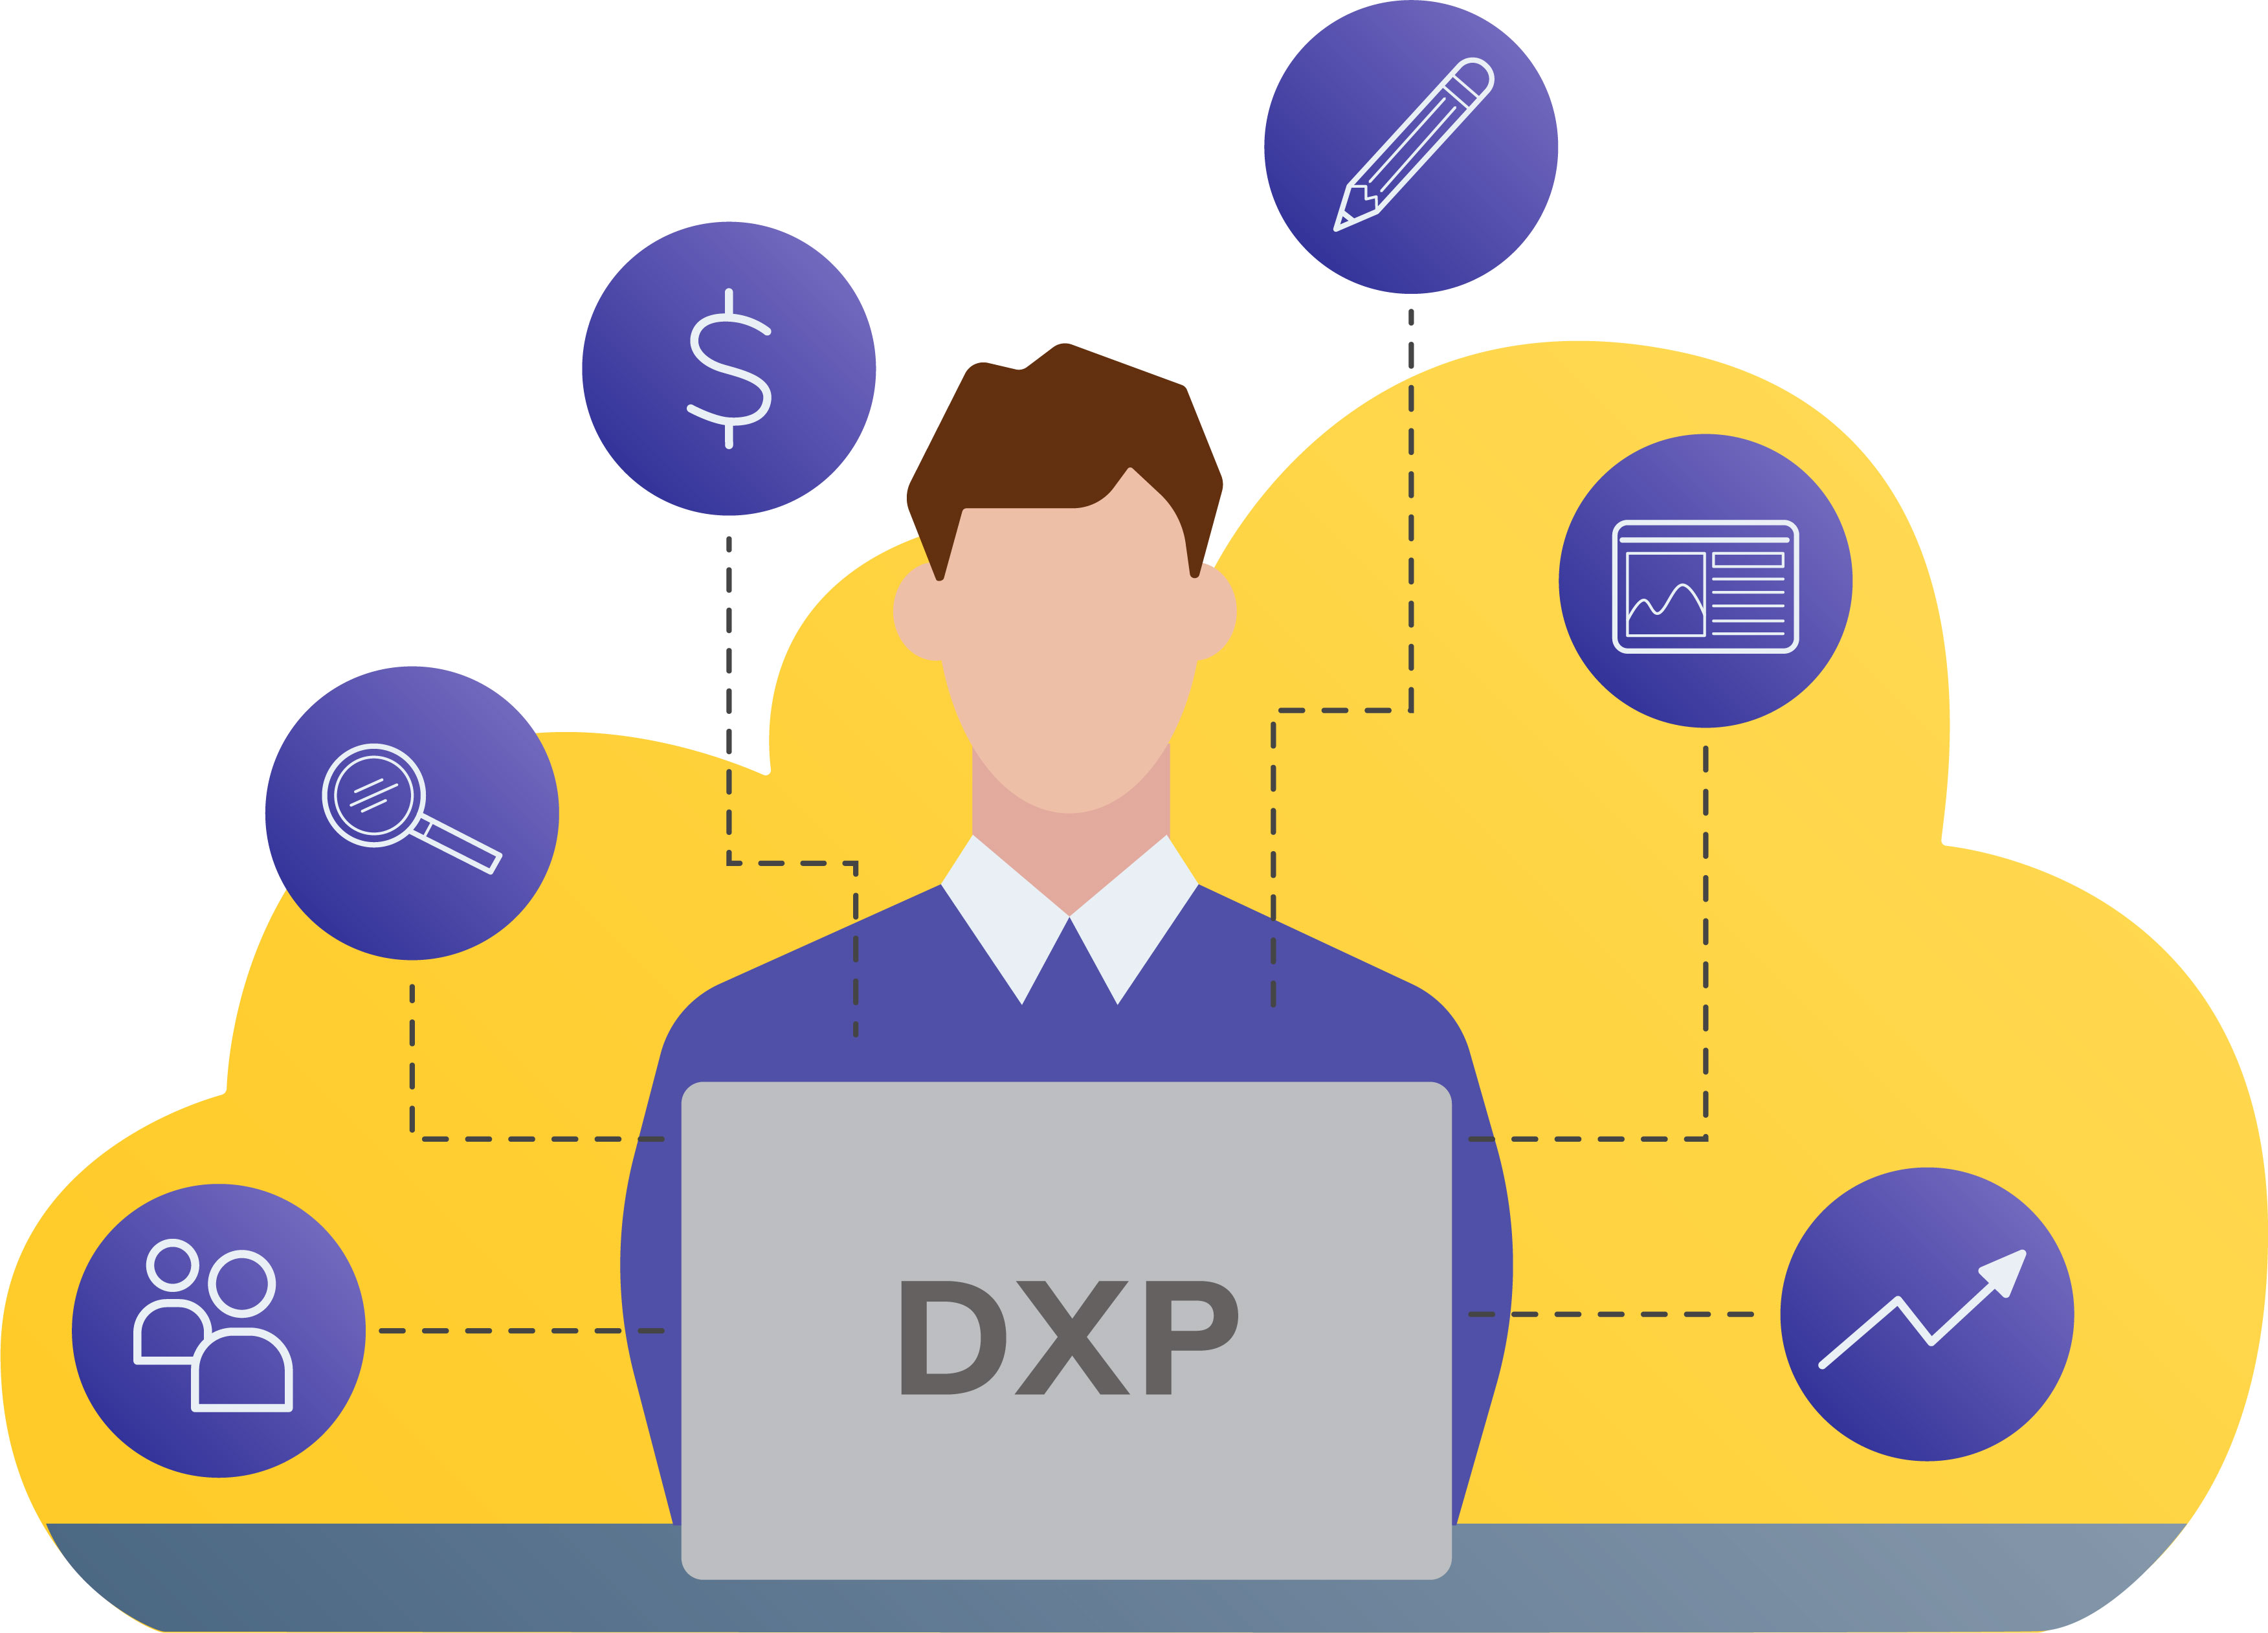 What is a DXP? On agilitycms.com